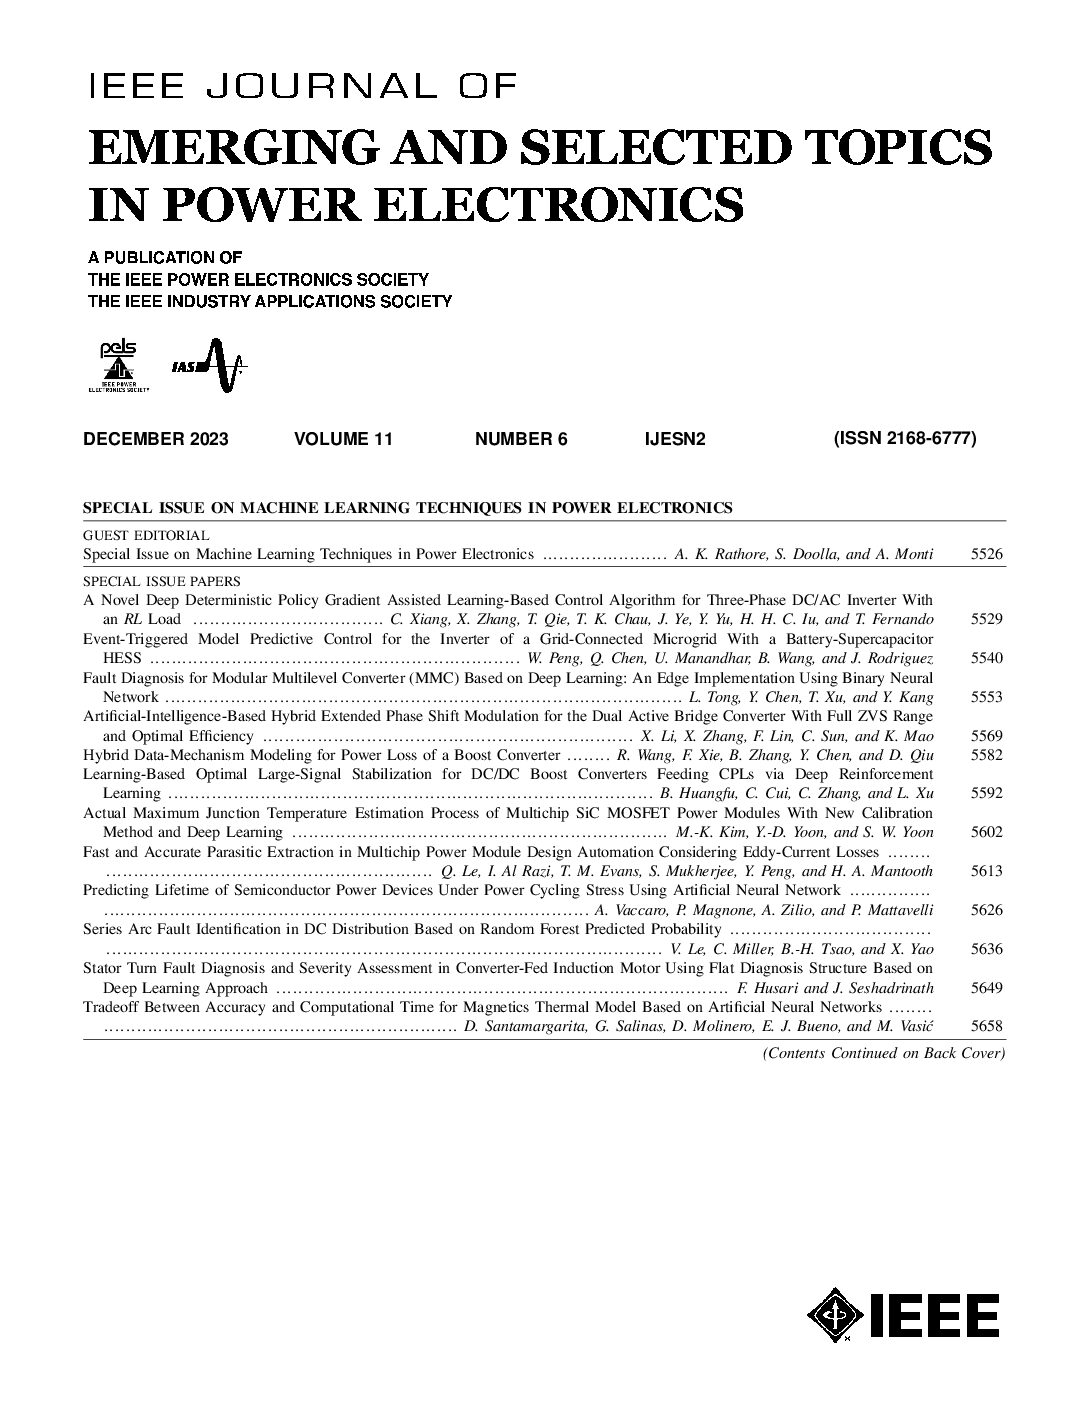 IEEE Journal of Emerging and Selected Topics in Power Electronics